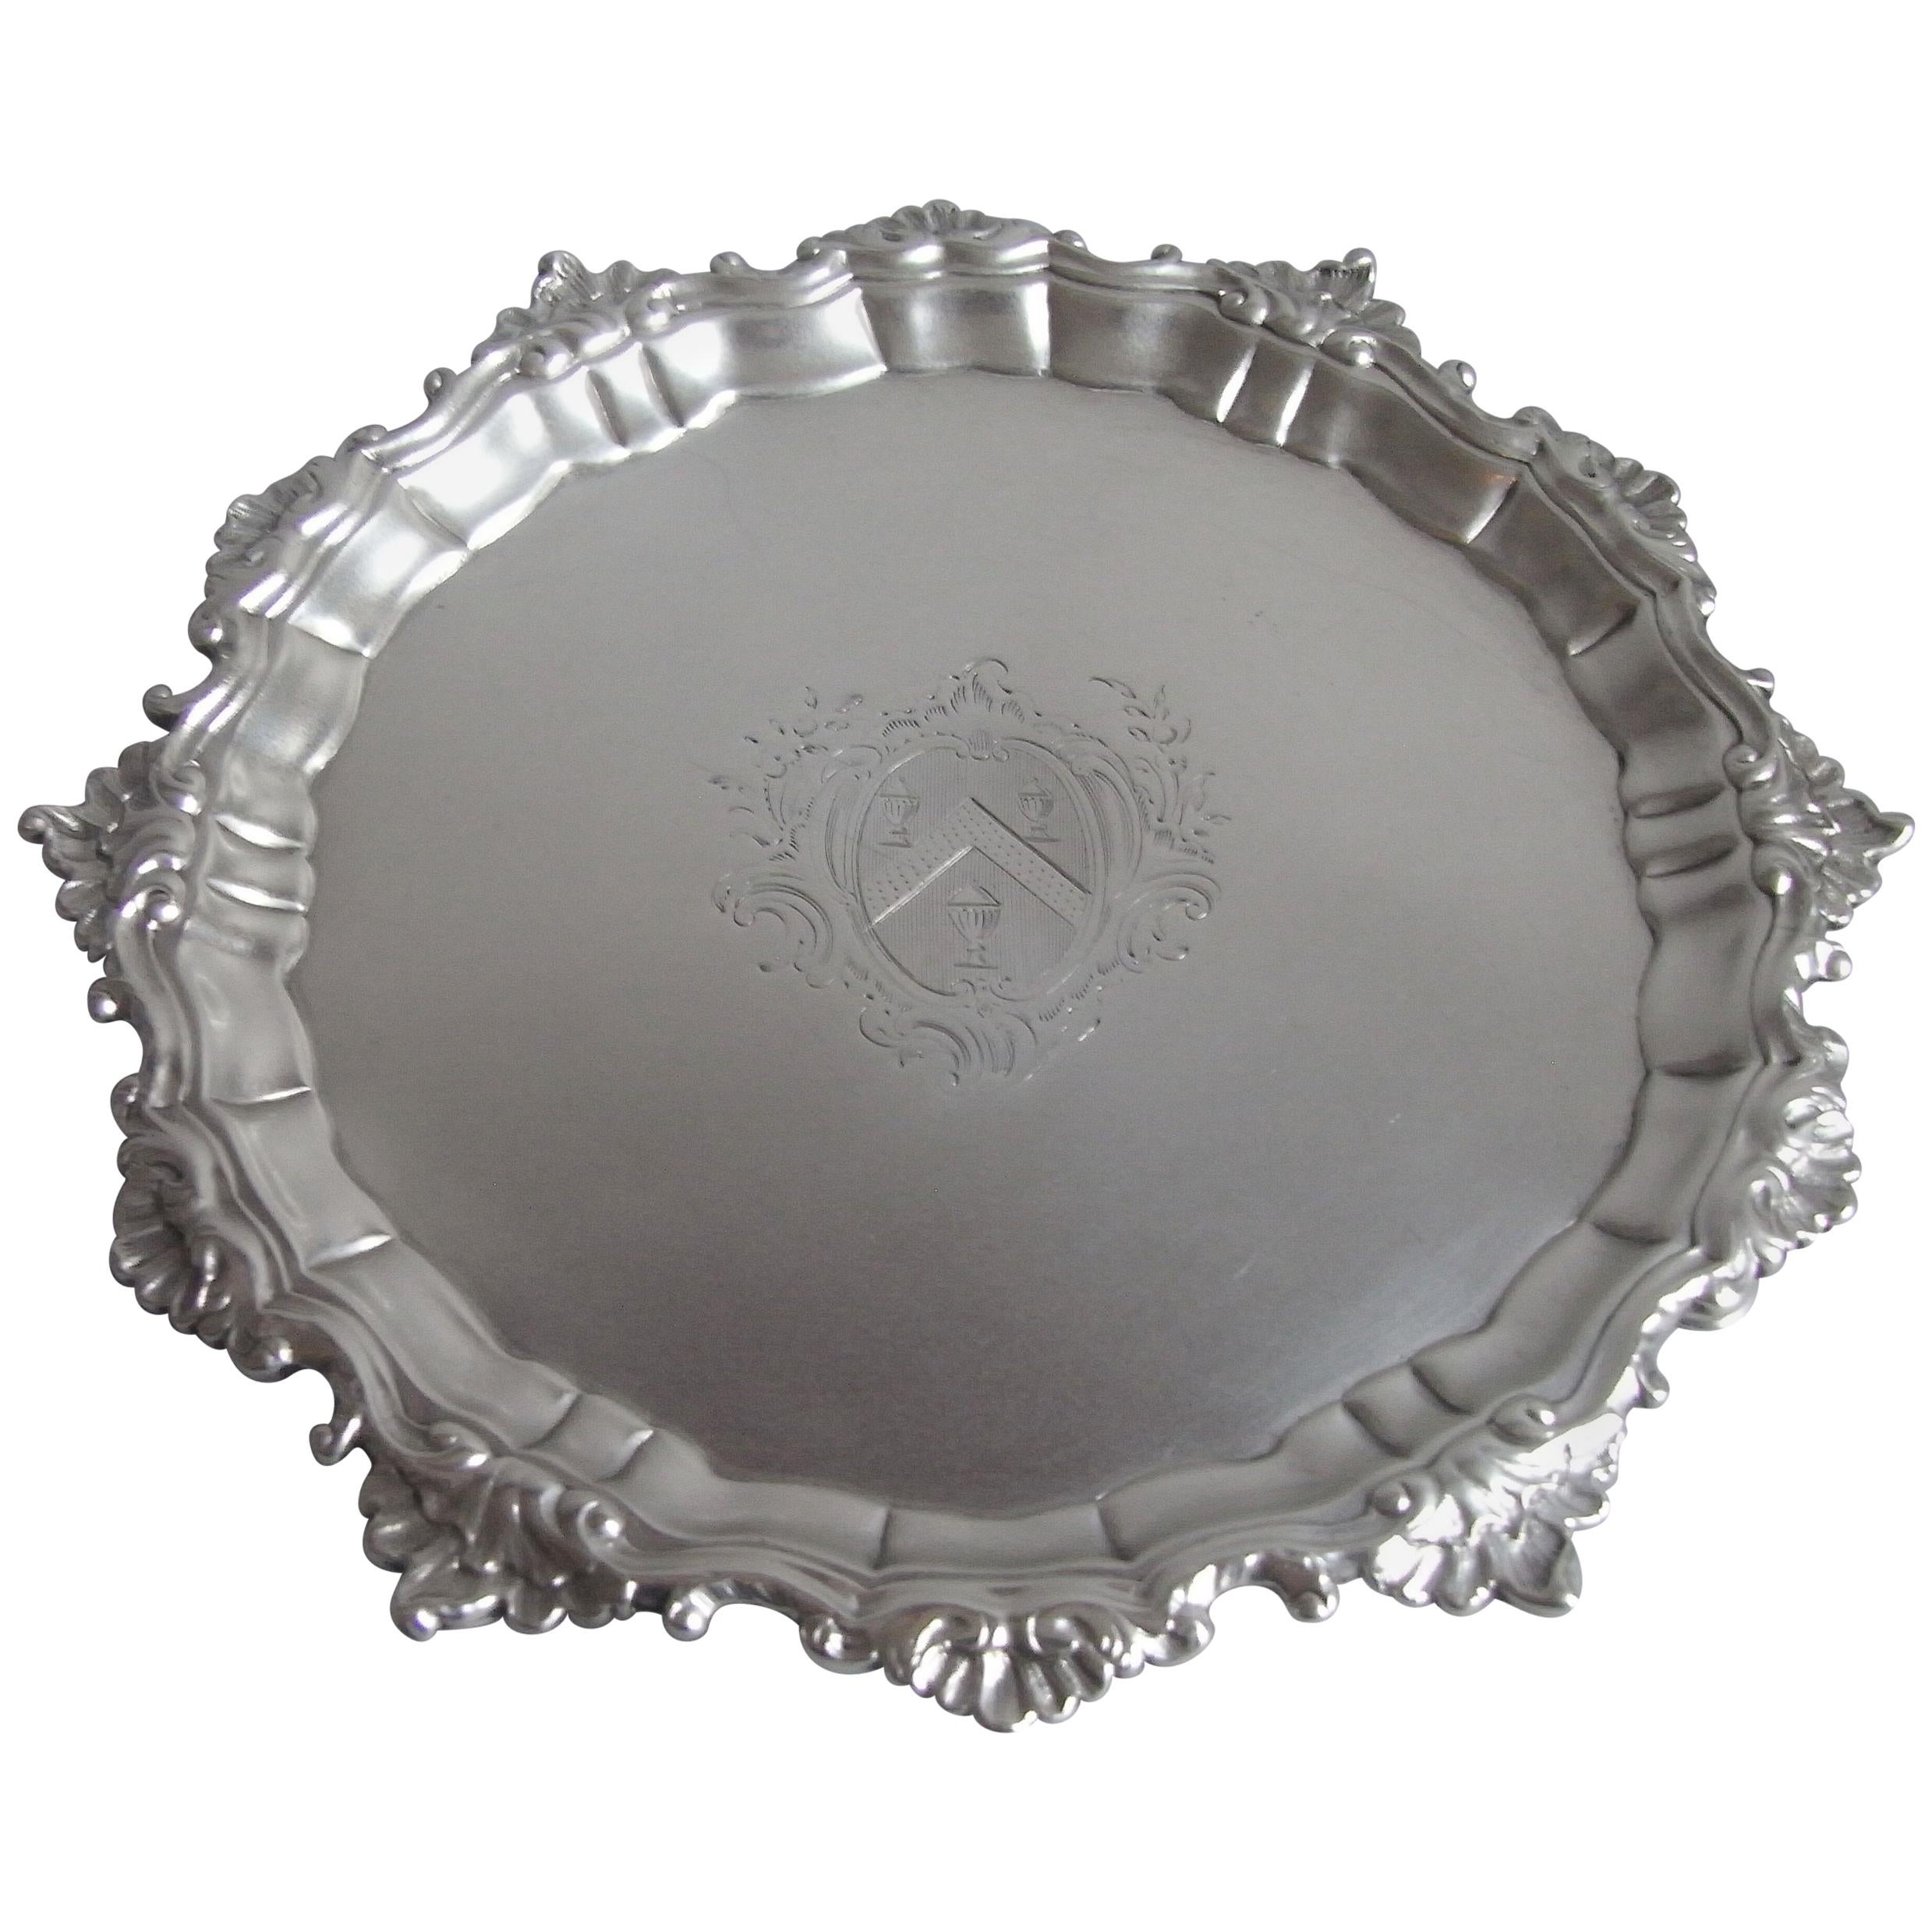 Good George II Salver Made in London in 1754 by Thomas Robinson